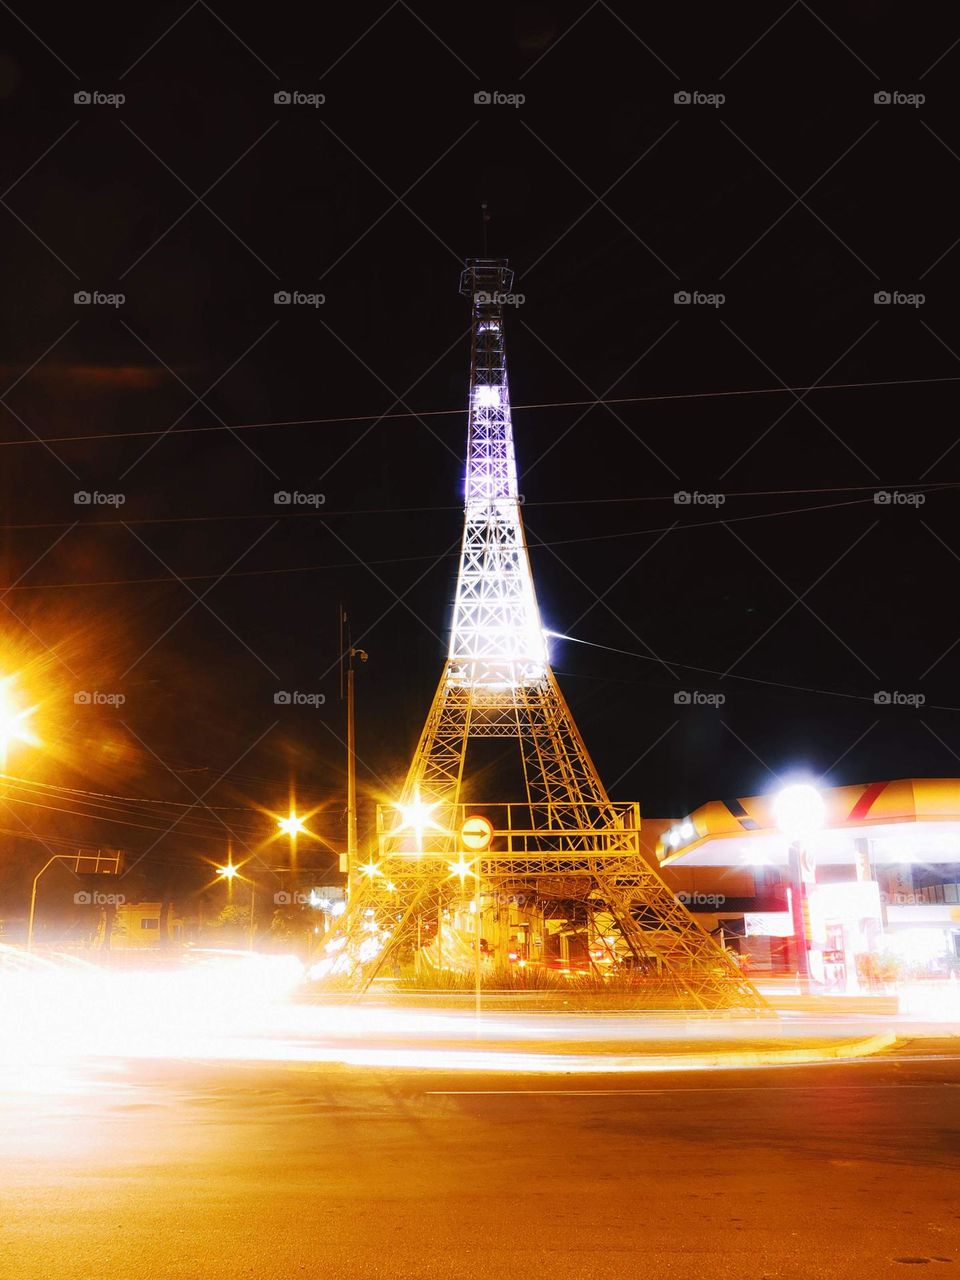 Long exposure light trails of a roundabout at night, with an Eiffel Tower model on the center